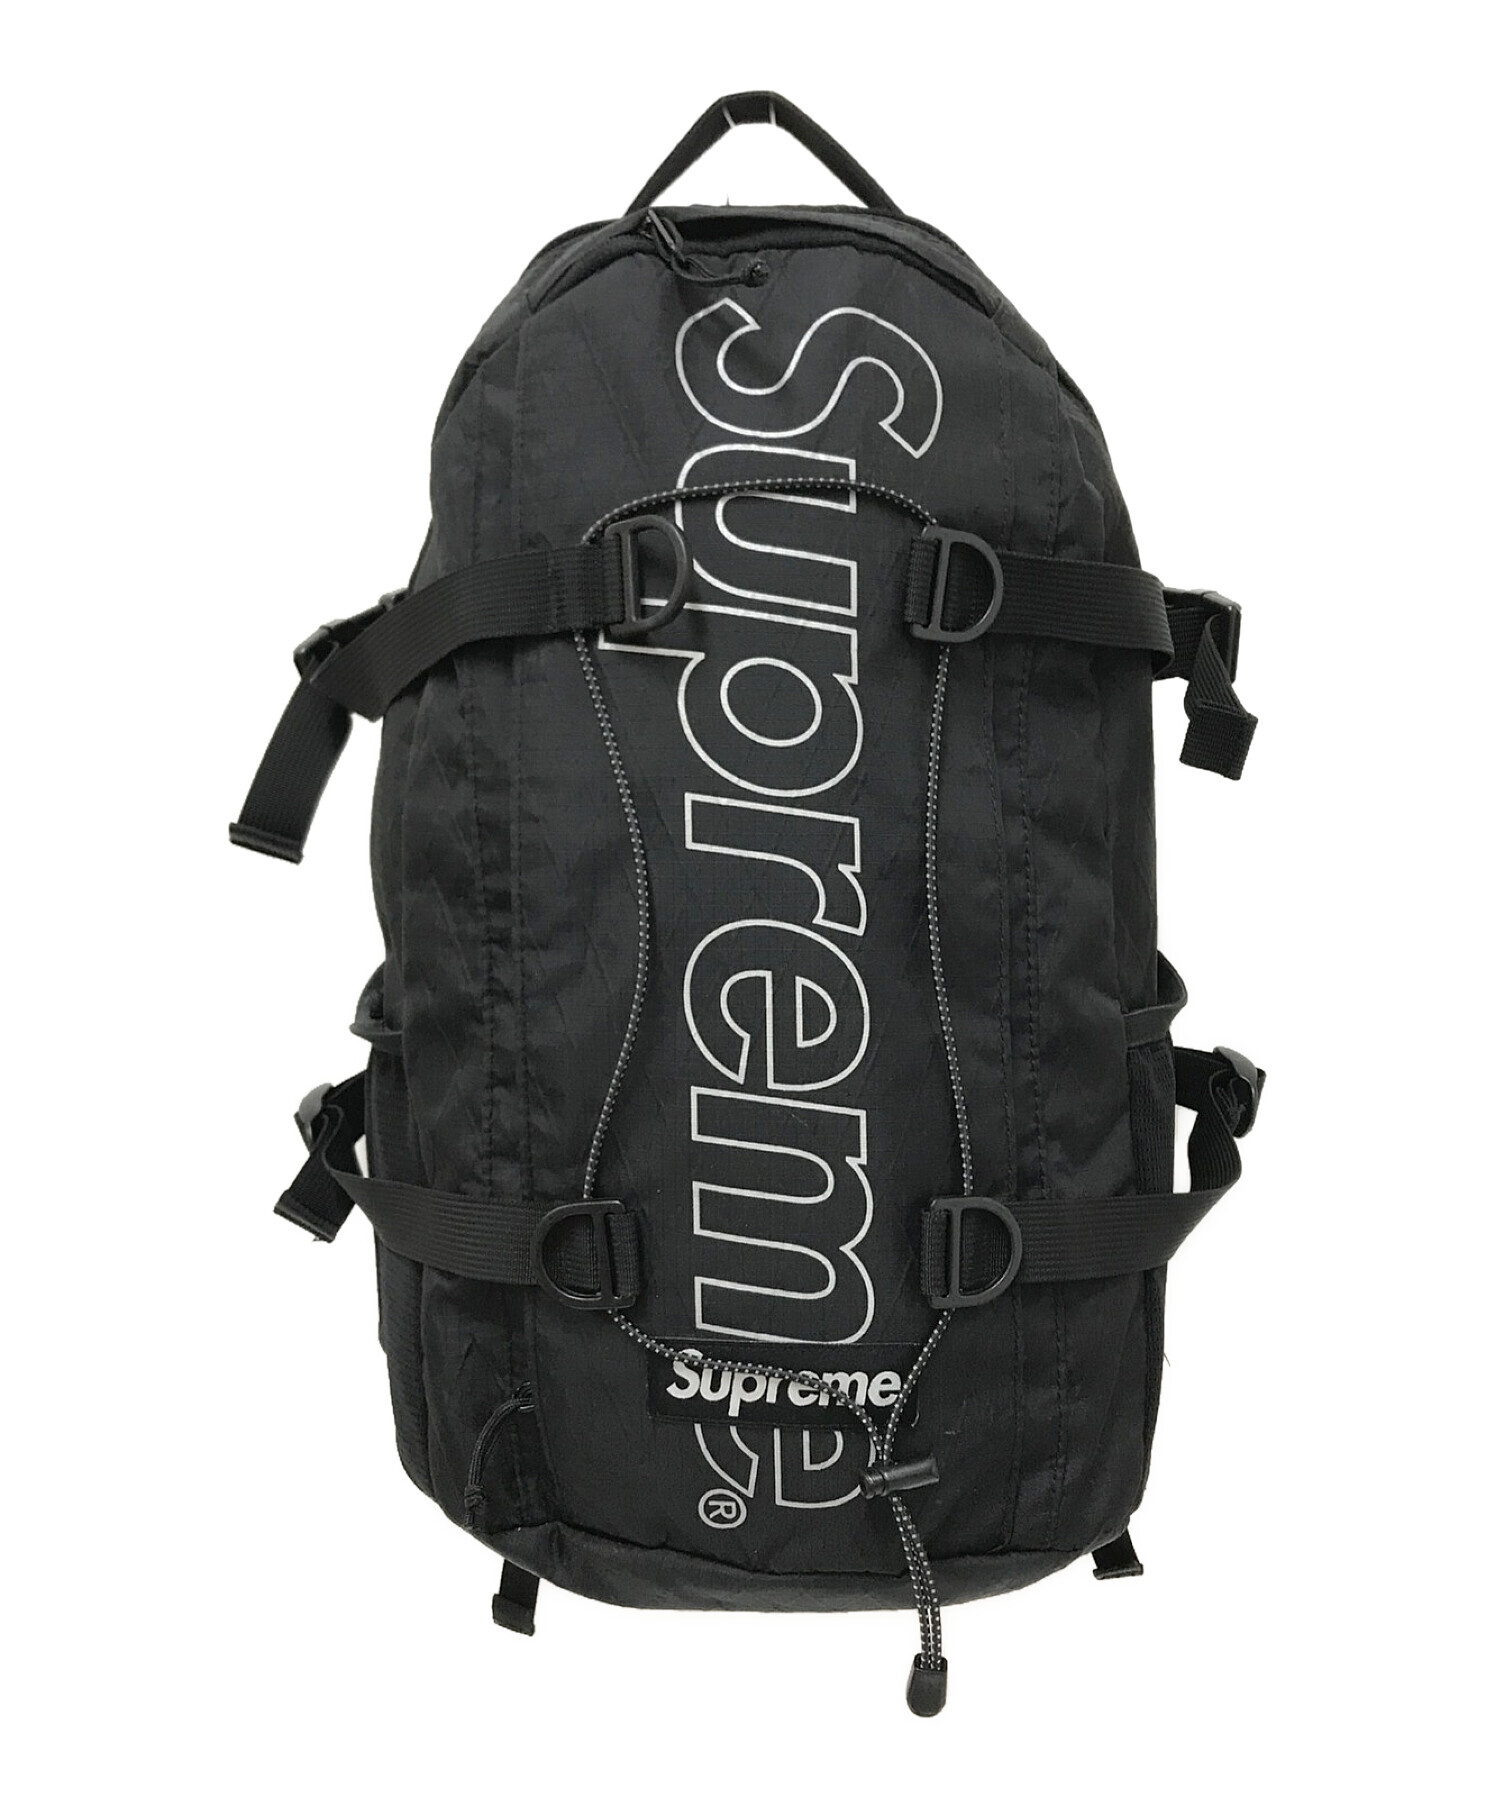 Supreme Backpack 18AWメンズ - バッグパック/リュック